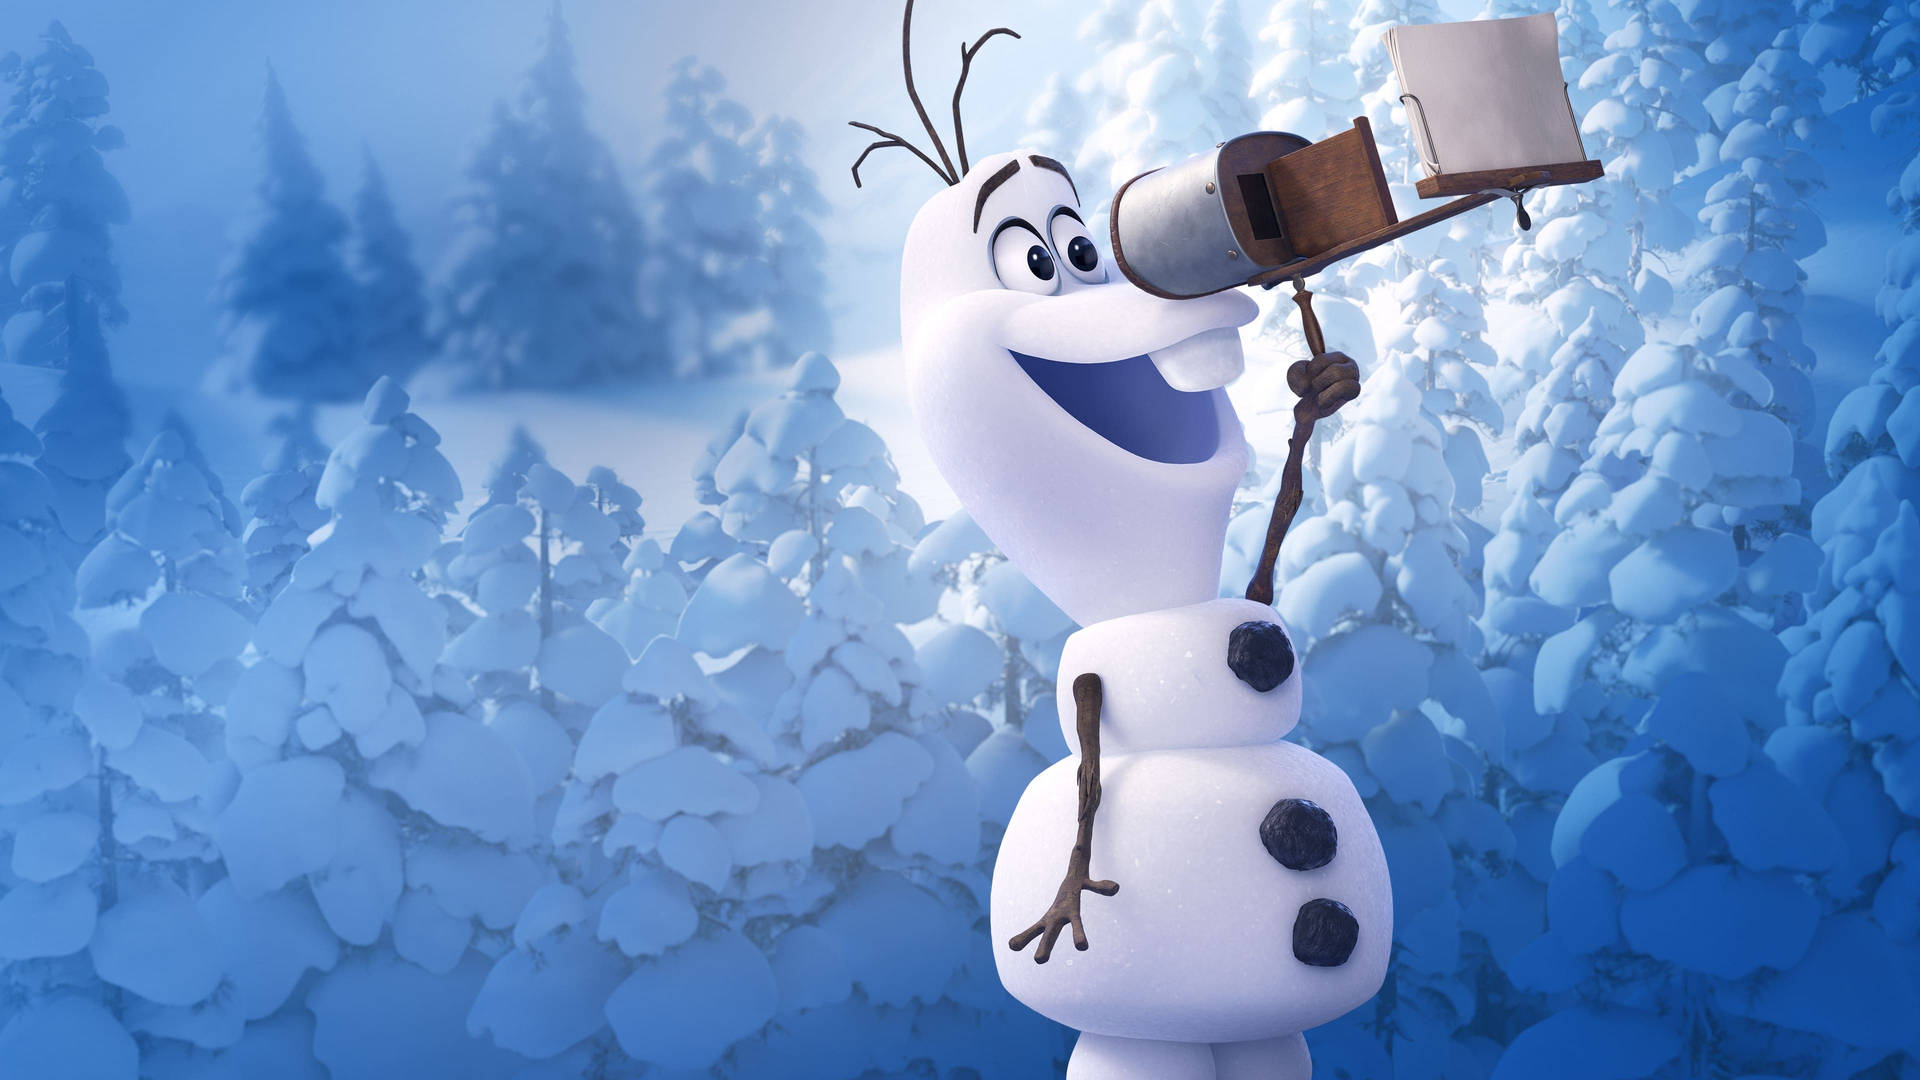 Free Olaf Wallpaper Downloads, [100+] Olaf Wallpapers for FREE | Wallpapers .com